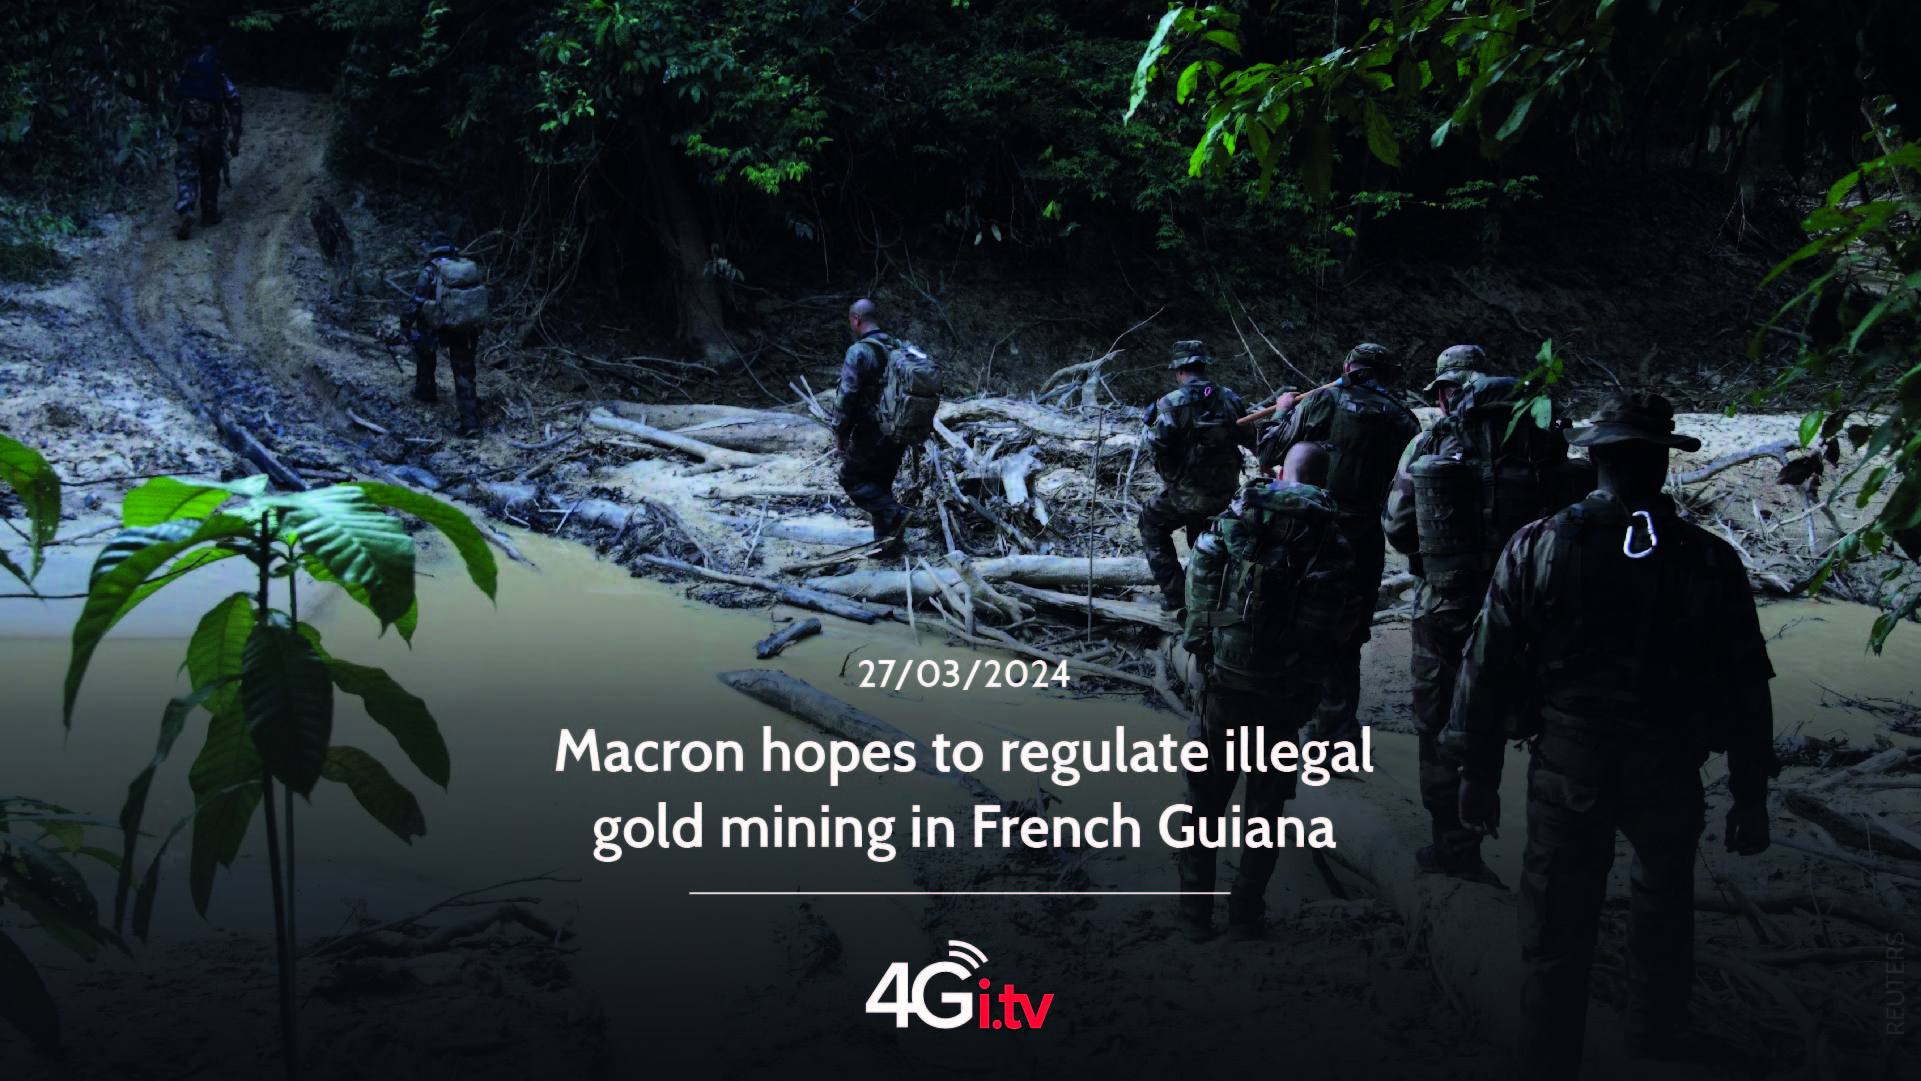 Подробнее о статье Macron hopes to regulate illegal gold mining in French Guiana